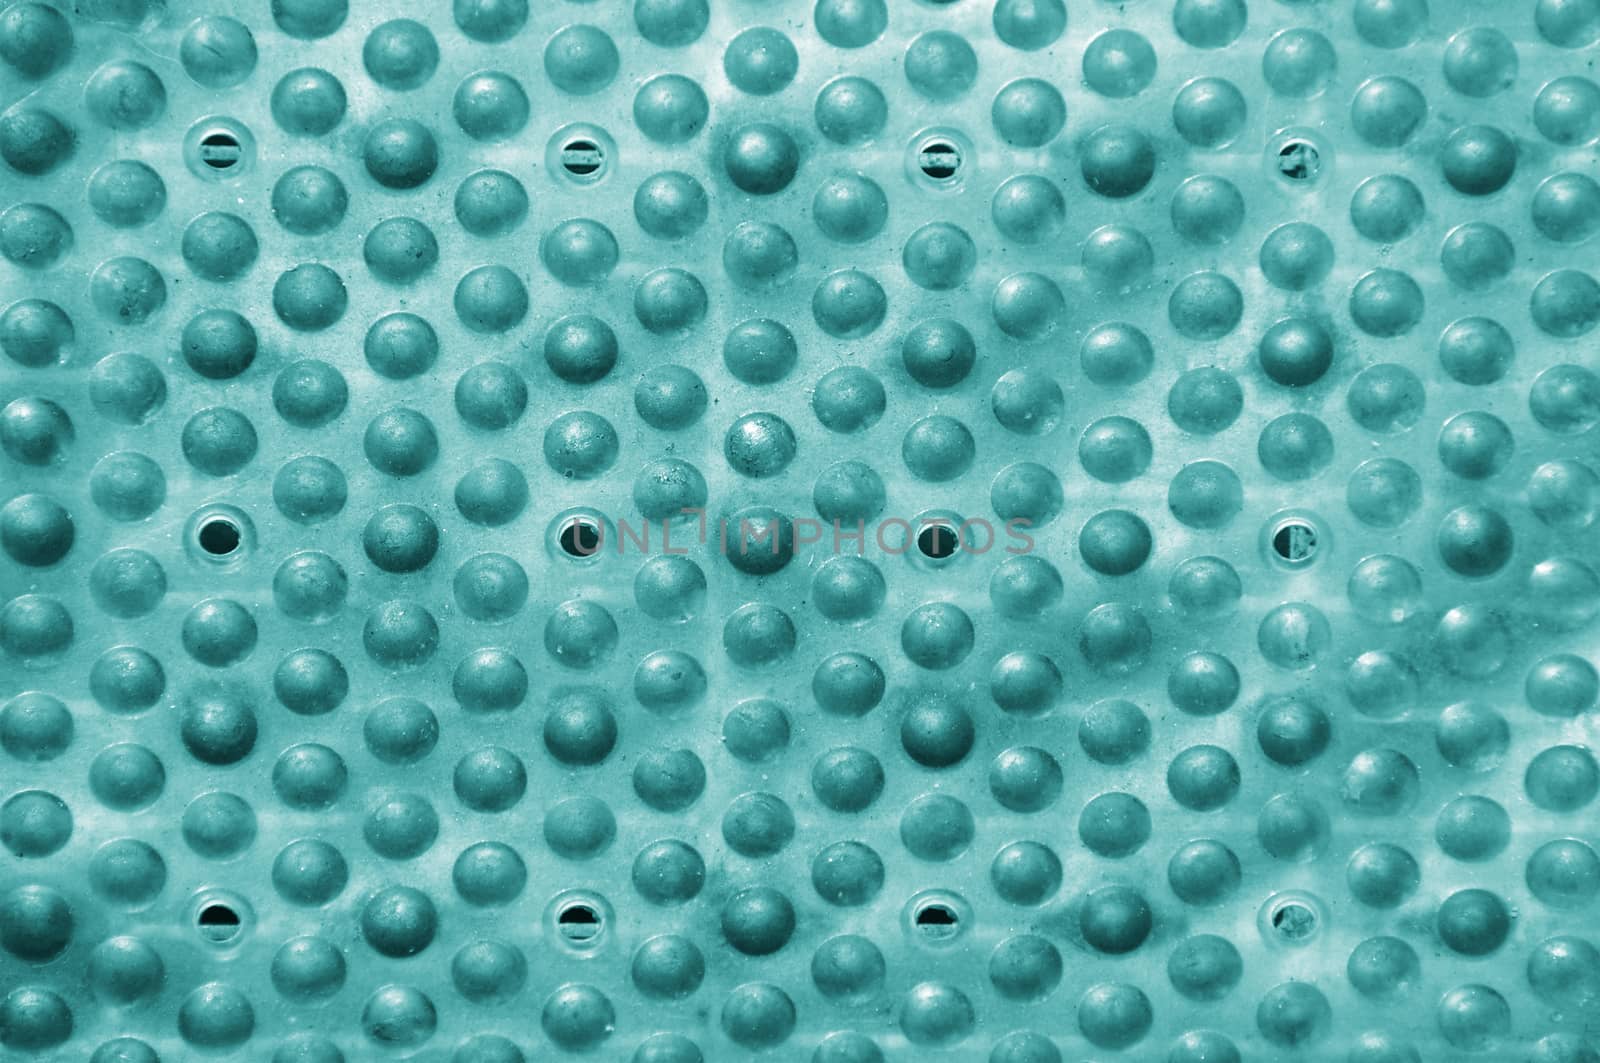 rubber texture with bubbles by AlessandraSuppo